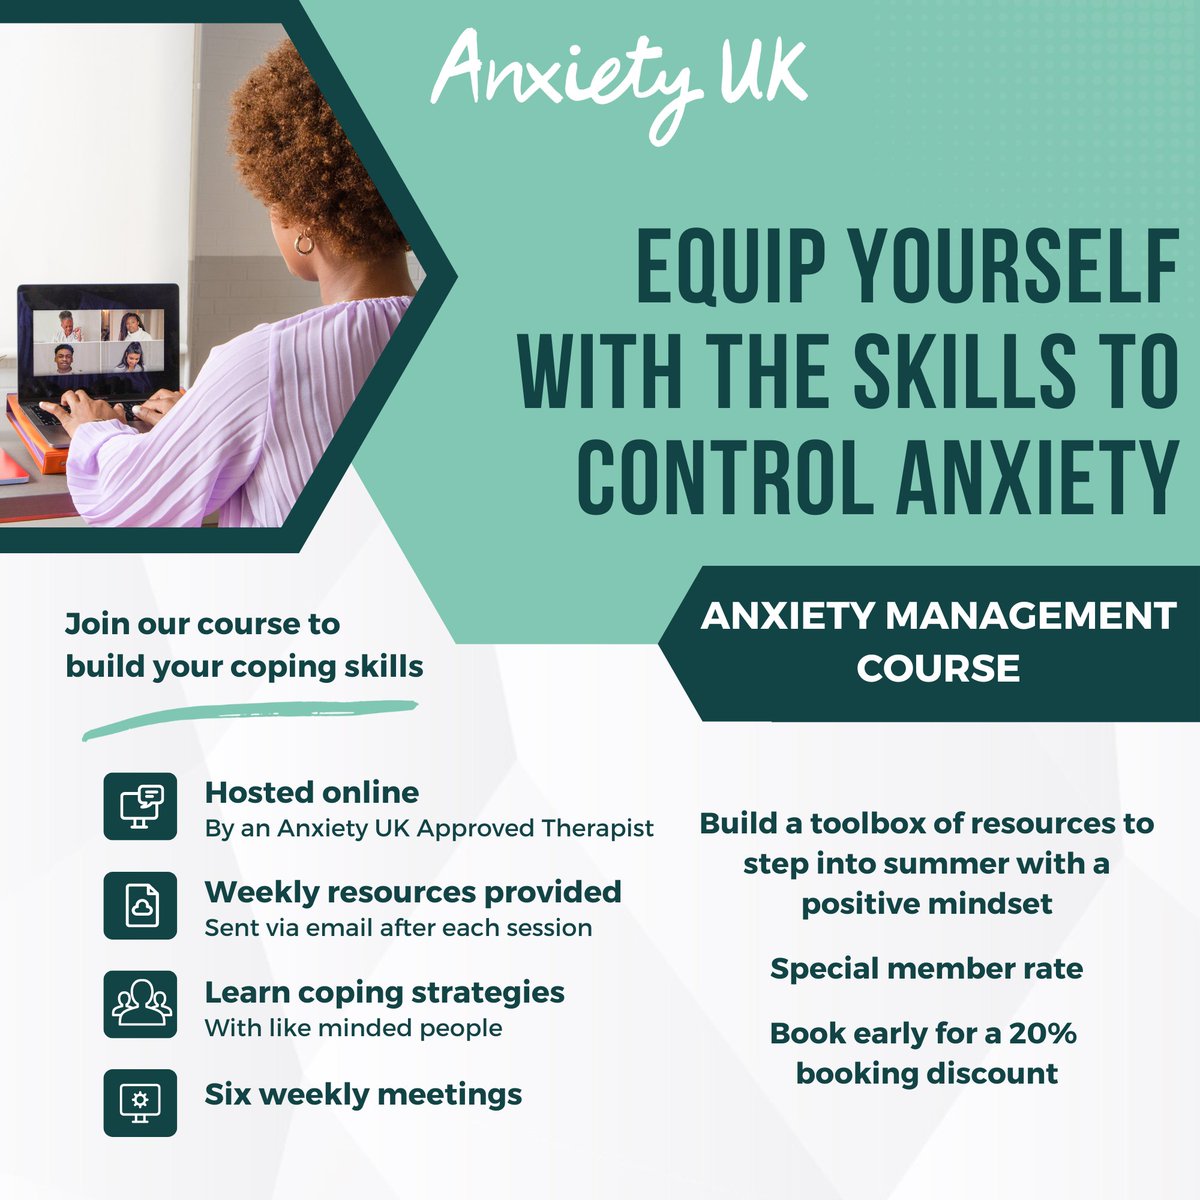 Connect with like-minded individuals who get it, on one of our next Anxiety Management courses! For more information, see here: anxietyuk.org.uk/products/uncat… #anxietymanagement #therapistledcourse